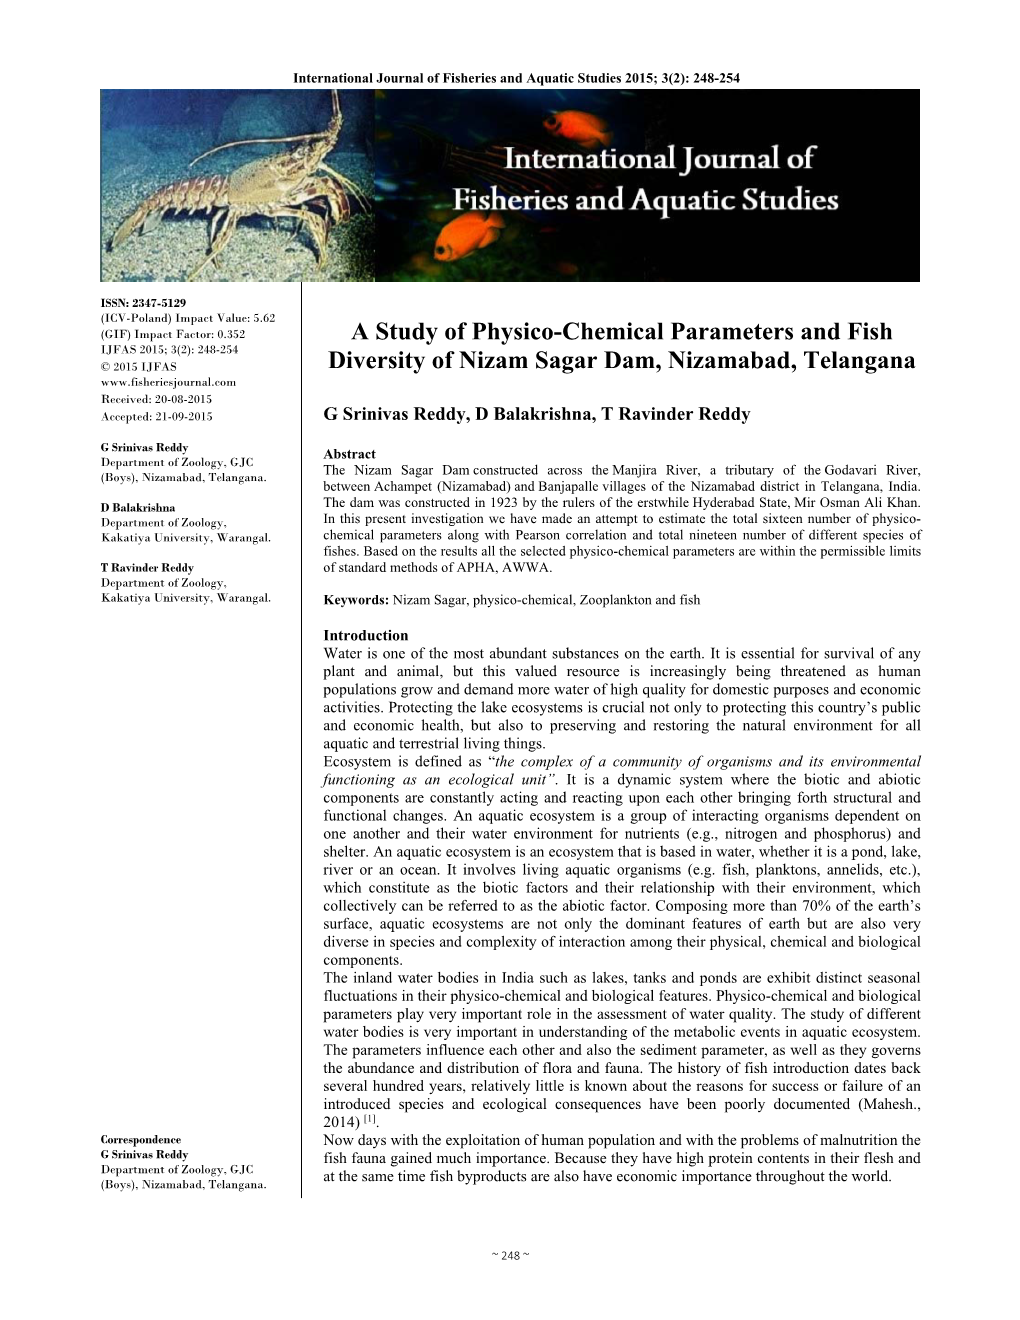 A Study of Physico-Chemical Parameters and Fish Diversity Of